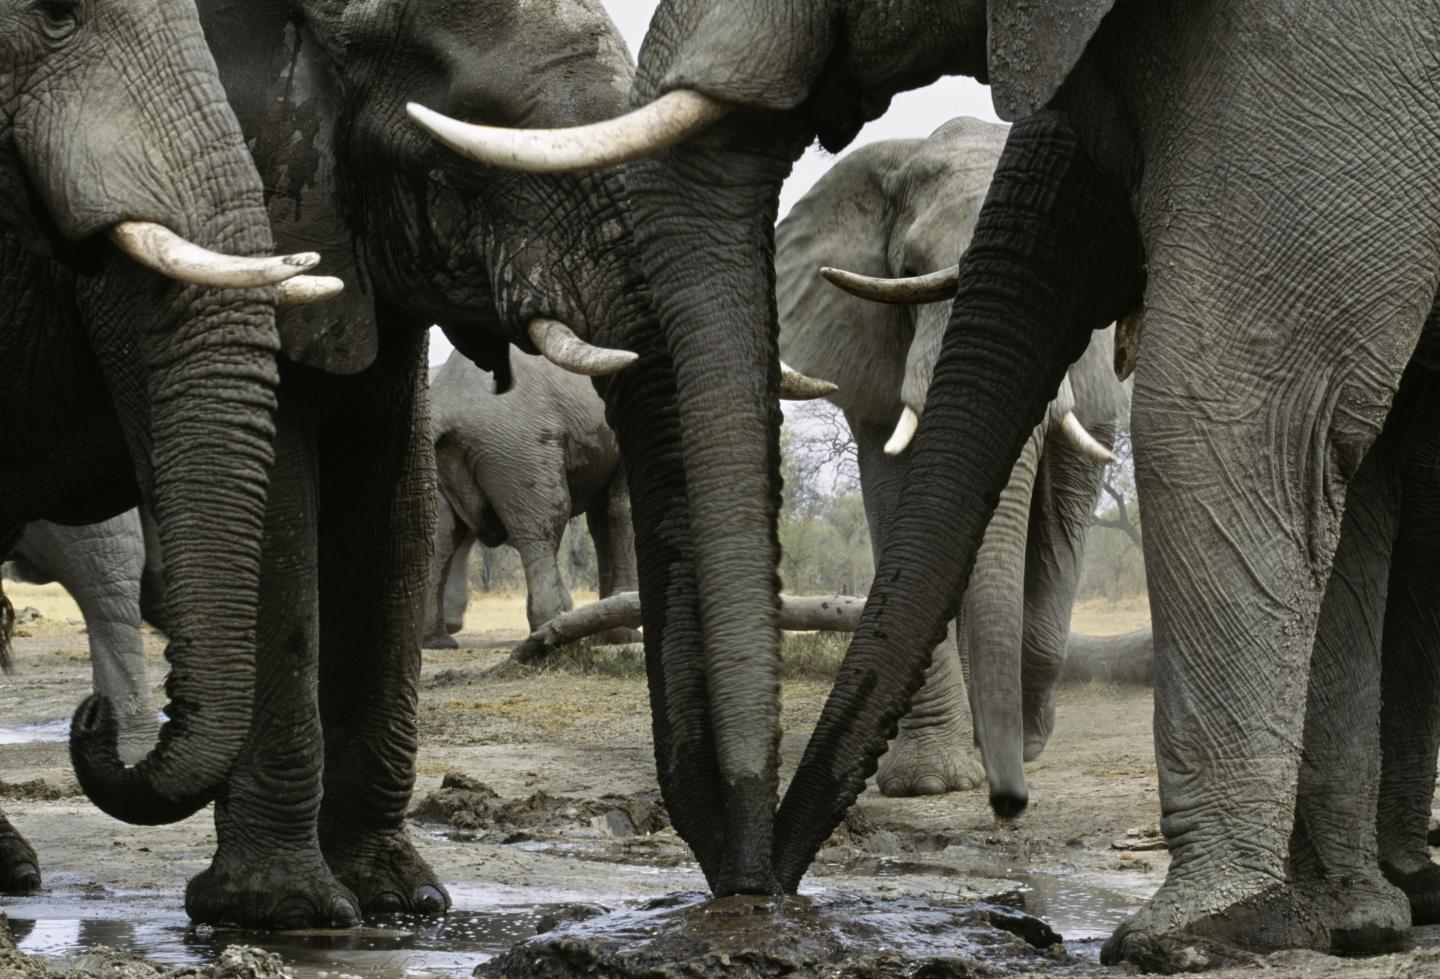 An Estimated 40,000 African Elephants Killed in 2011